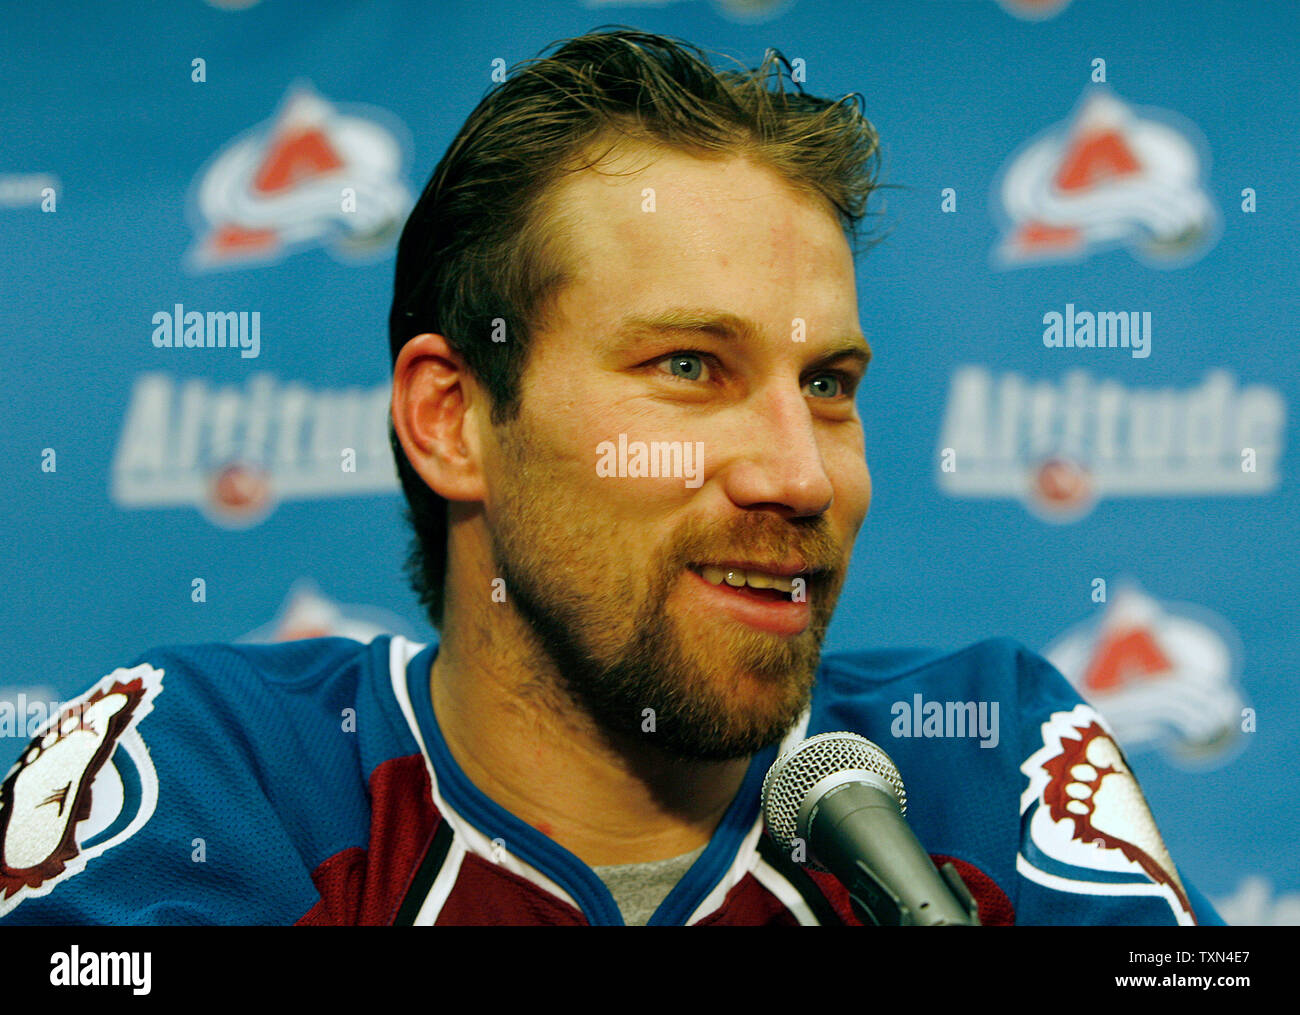 No ID needed for famous Peter Forsberg – The Denver Post